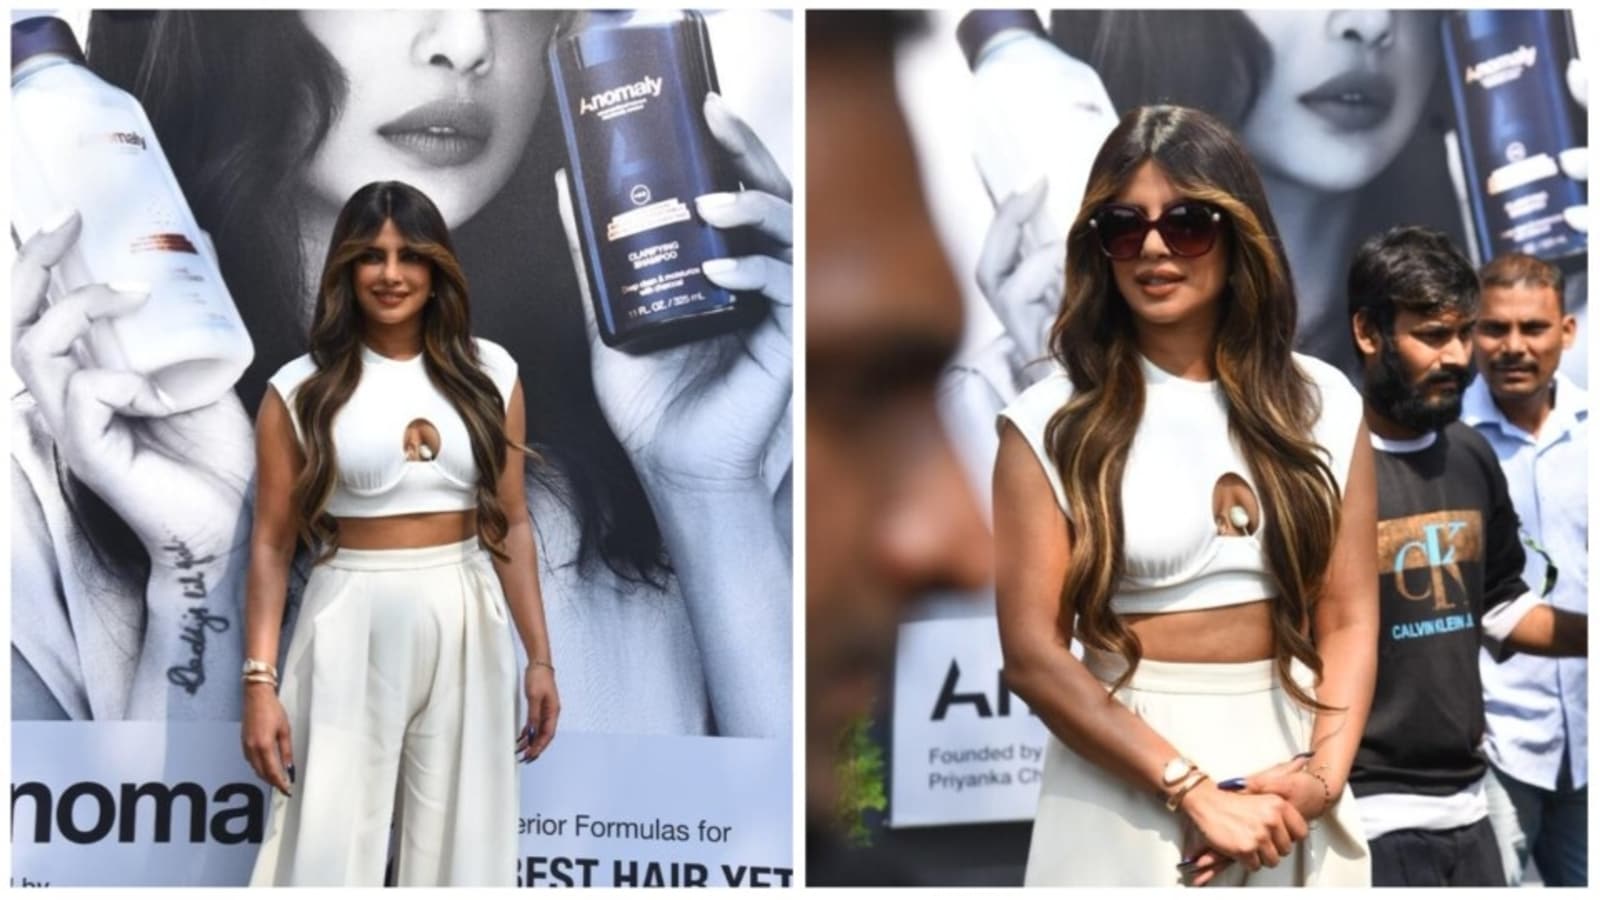 Priyanka Chopra looks stylish as she steps out to promote her haircare brand | Bollywood